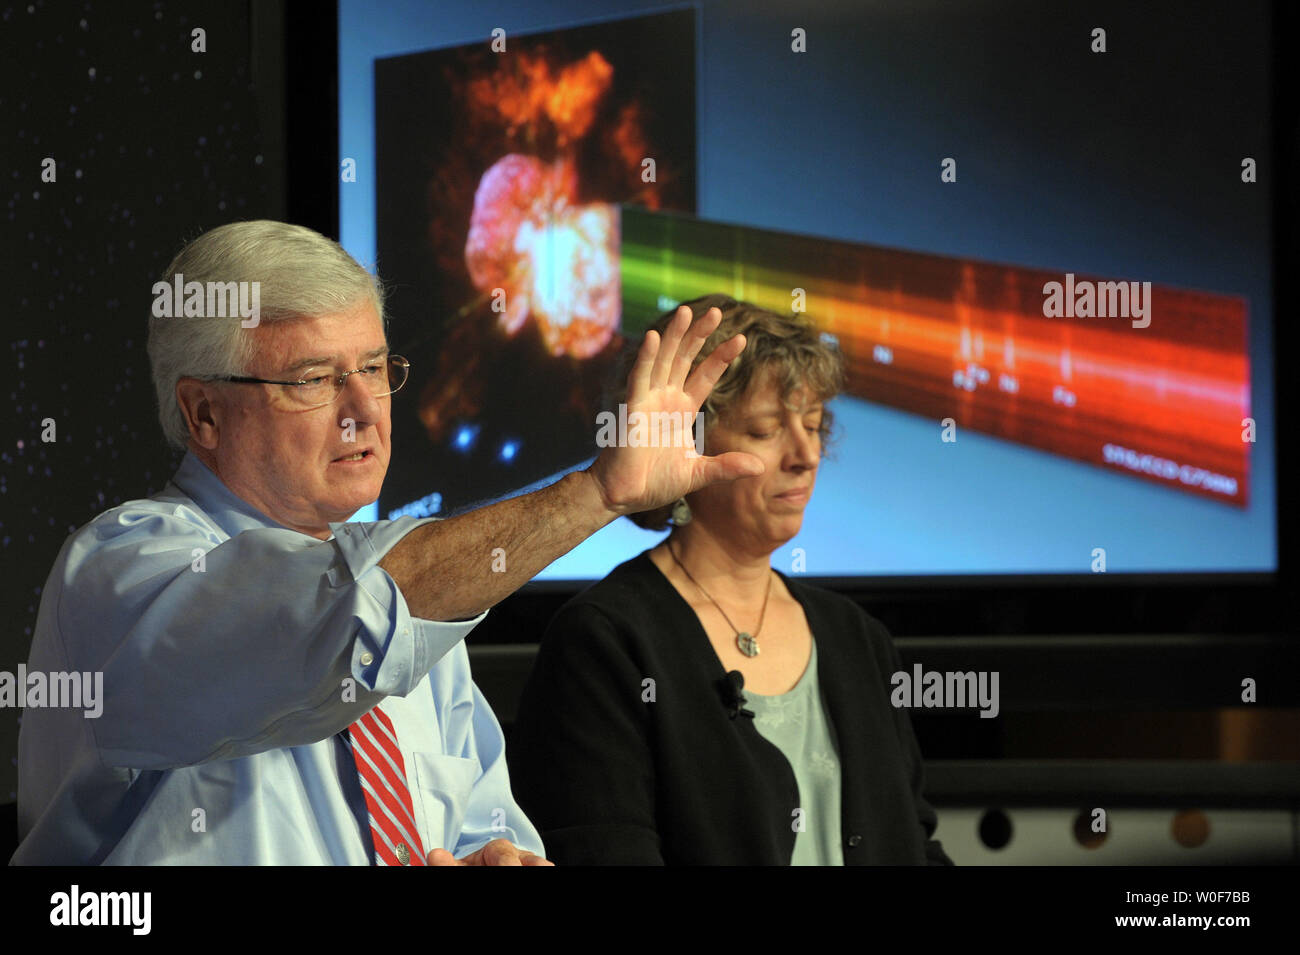 James Green, Cosmic Origins Spectrograph principle investigator at the University of Colorado speaks as NASA unveils new science from the recently refurbished Hubble Space Telescope at NASA headquarters in Washington on September 9, 2009. At right is Heidi Hammel, senior research scientist at the Space Science Institute.    UPI/Roger L. Wollenberg Stock Photo